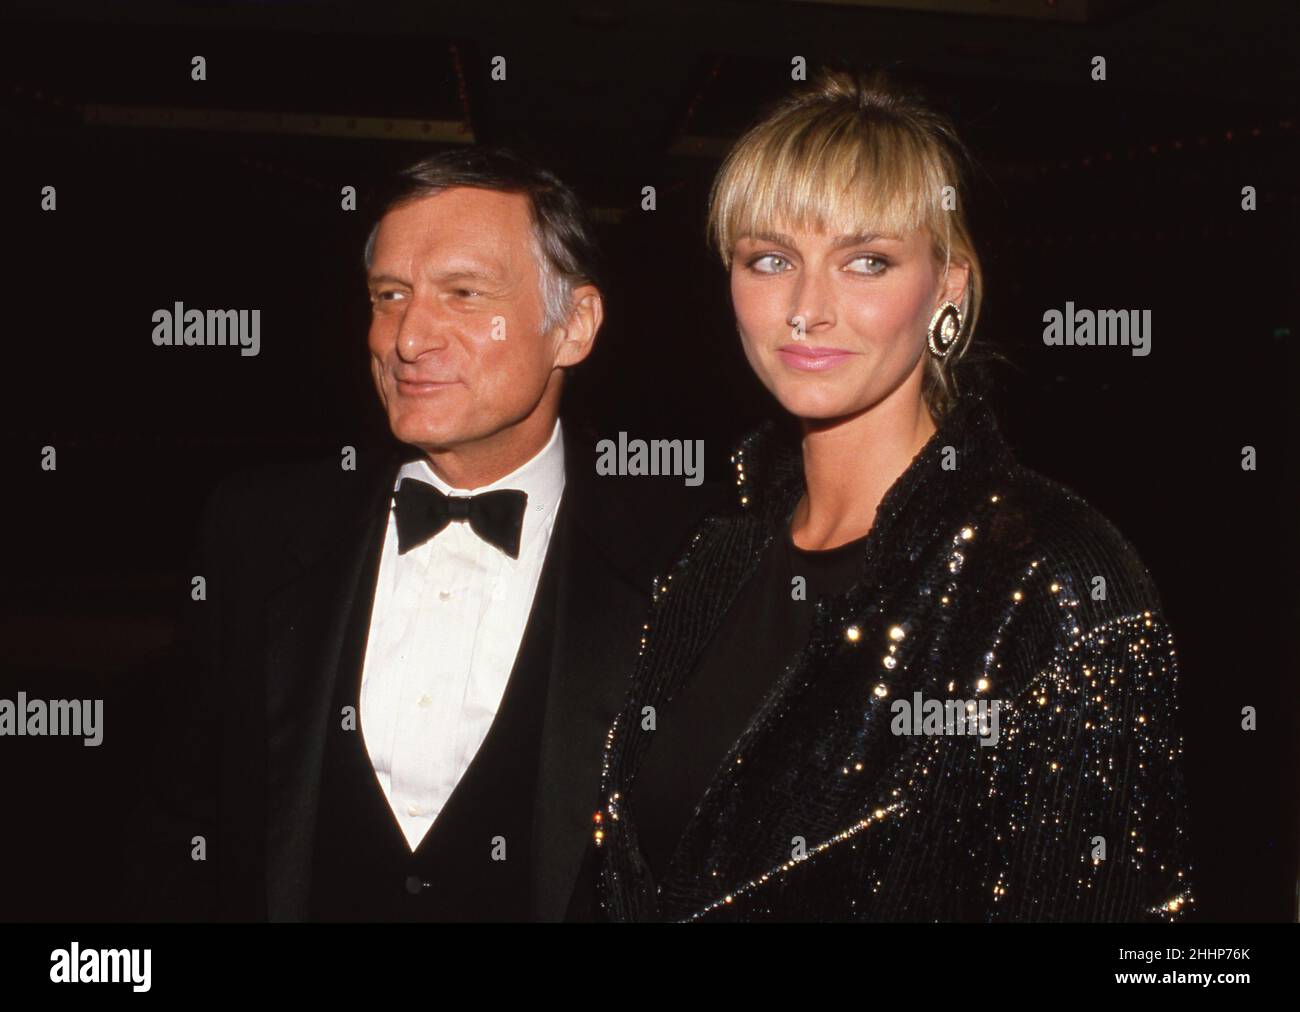 Hugh Hefner and Kimberley Conrad attend 16th Annual American Film Institute Lifetime Achievement Awards Honoring Jack Lemmon on March 10, 1988 at the Beverly Hilton Hotel in Beverly Hills, California. Credit: Ralph Dominguez/MediaPunch Stock Photo